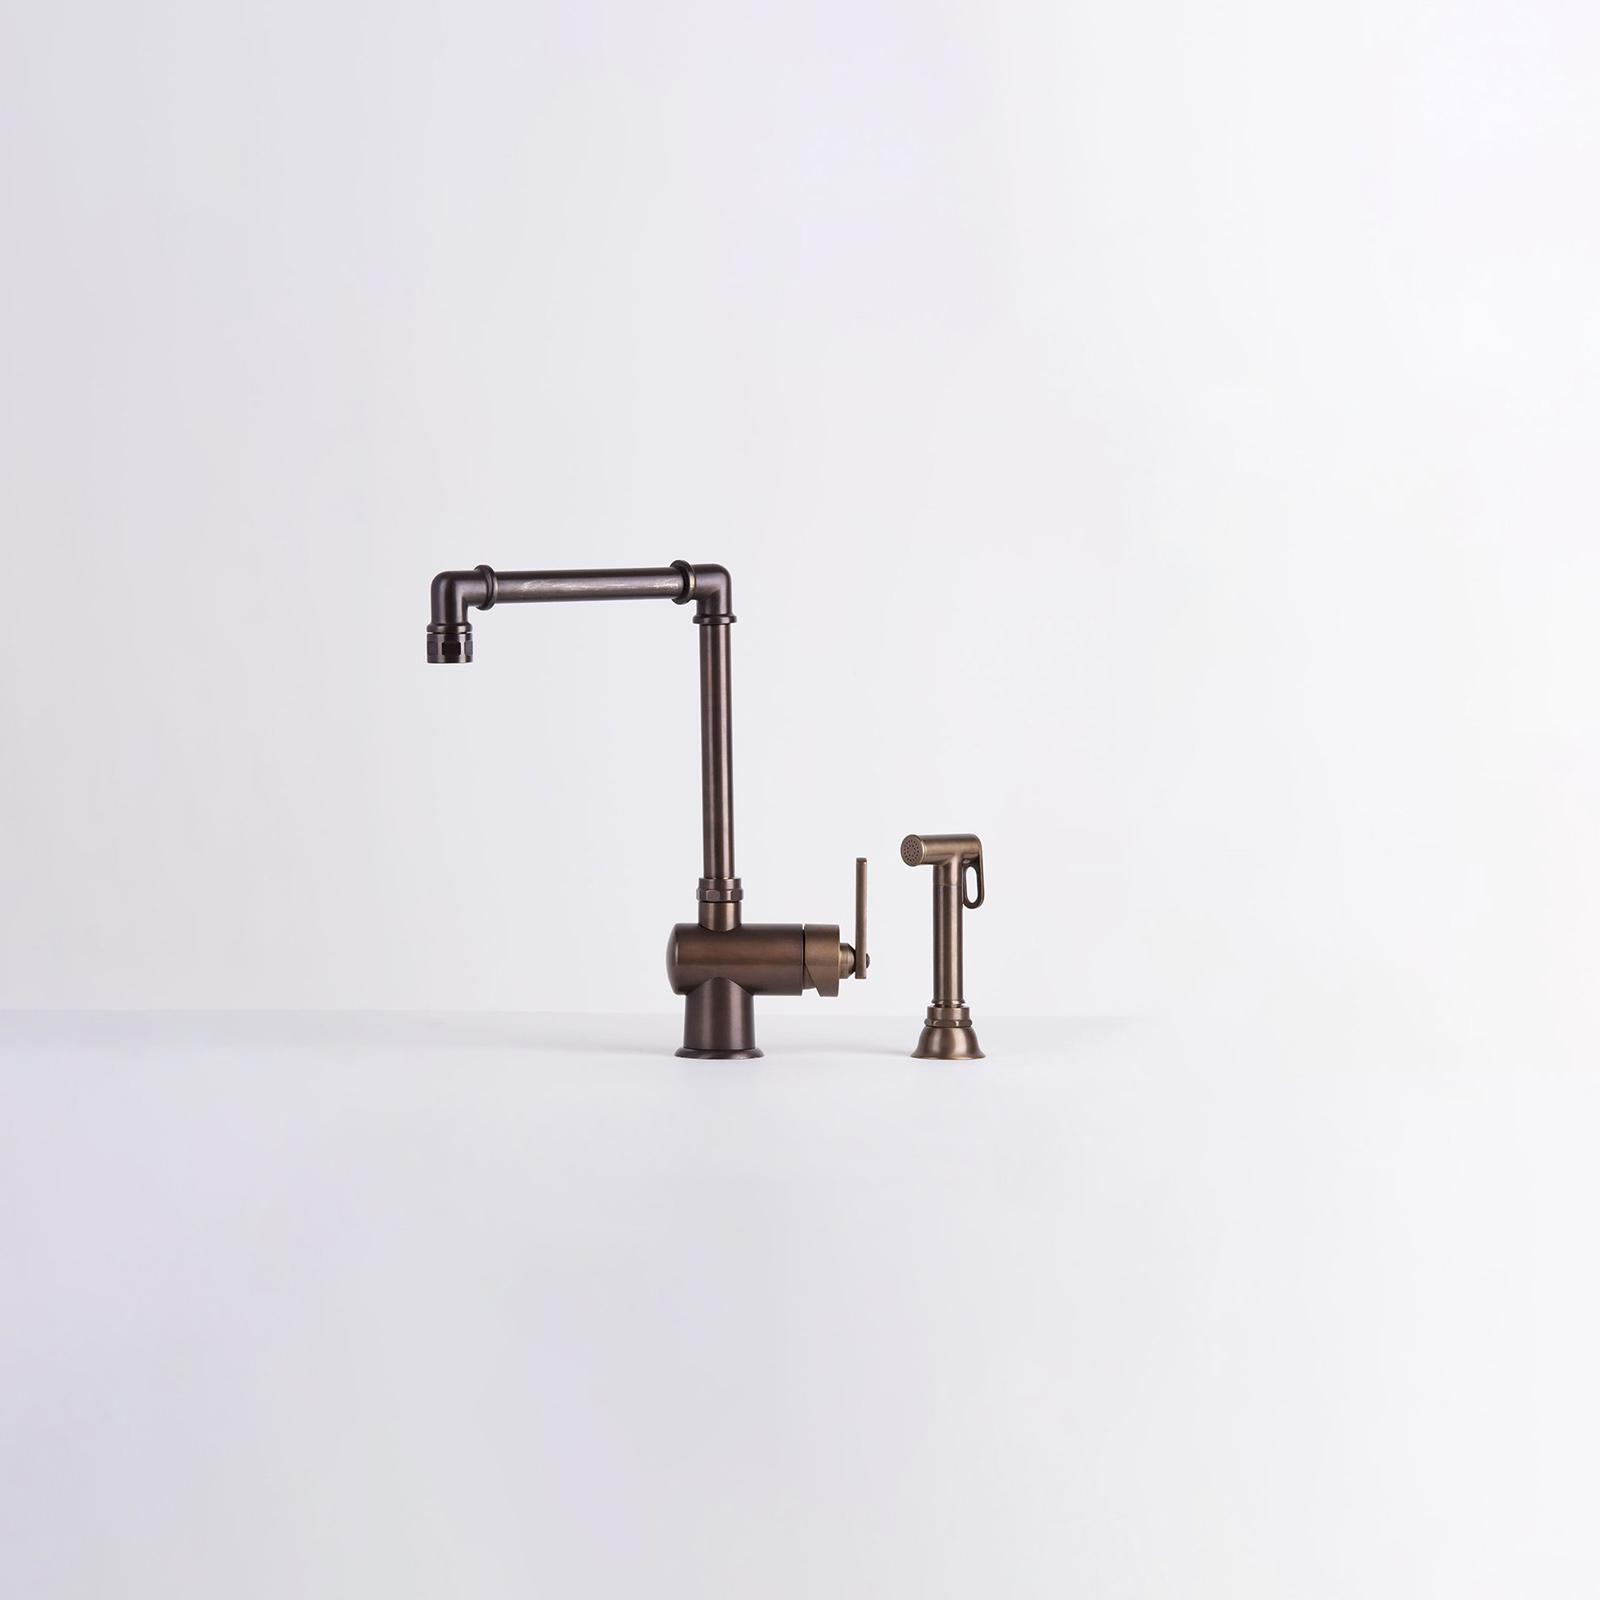 High-quality mixer tap Queen - rc948084